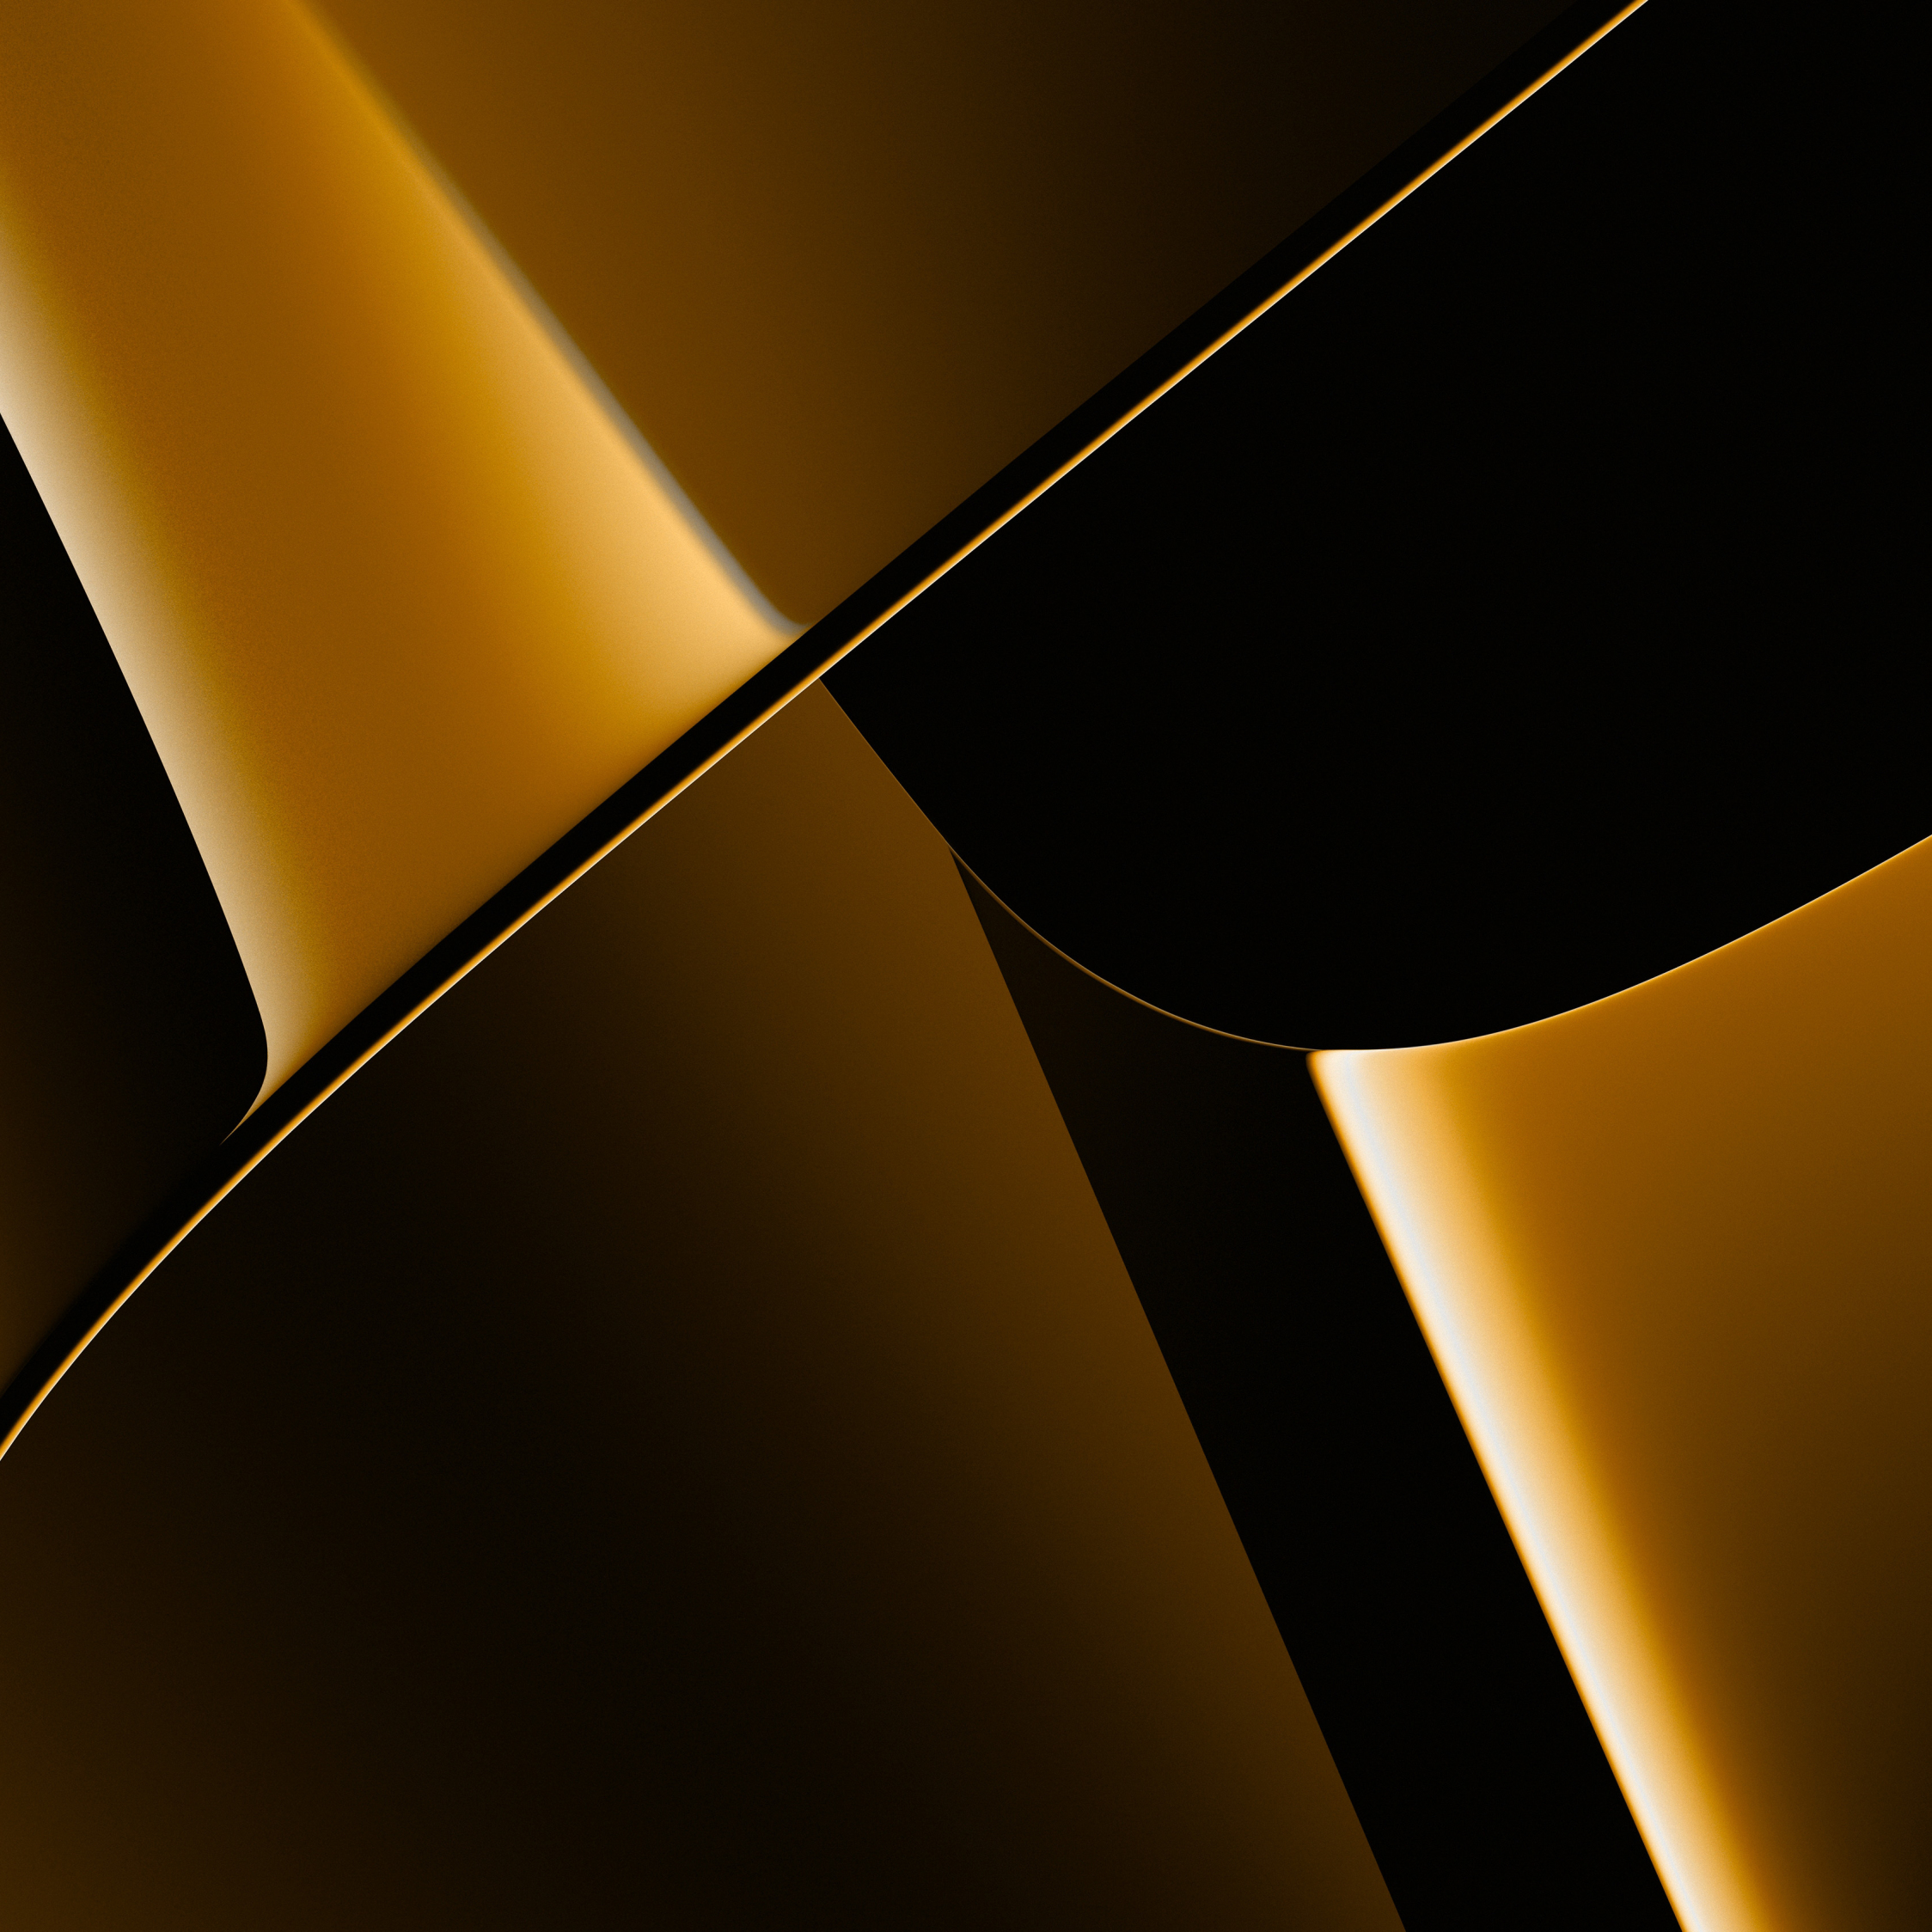 Golden surface, abstract, shapes, 2248x2248 wallpaper